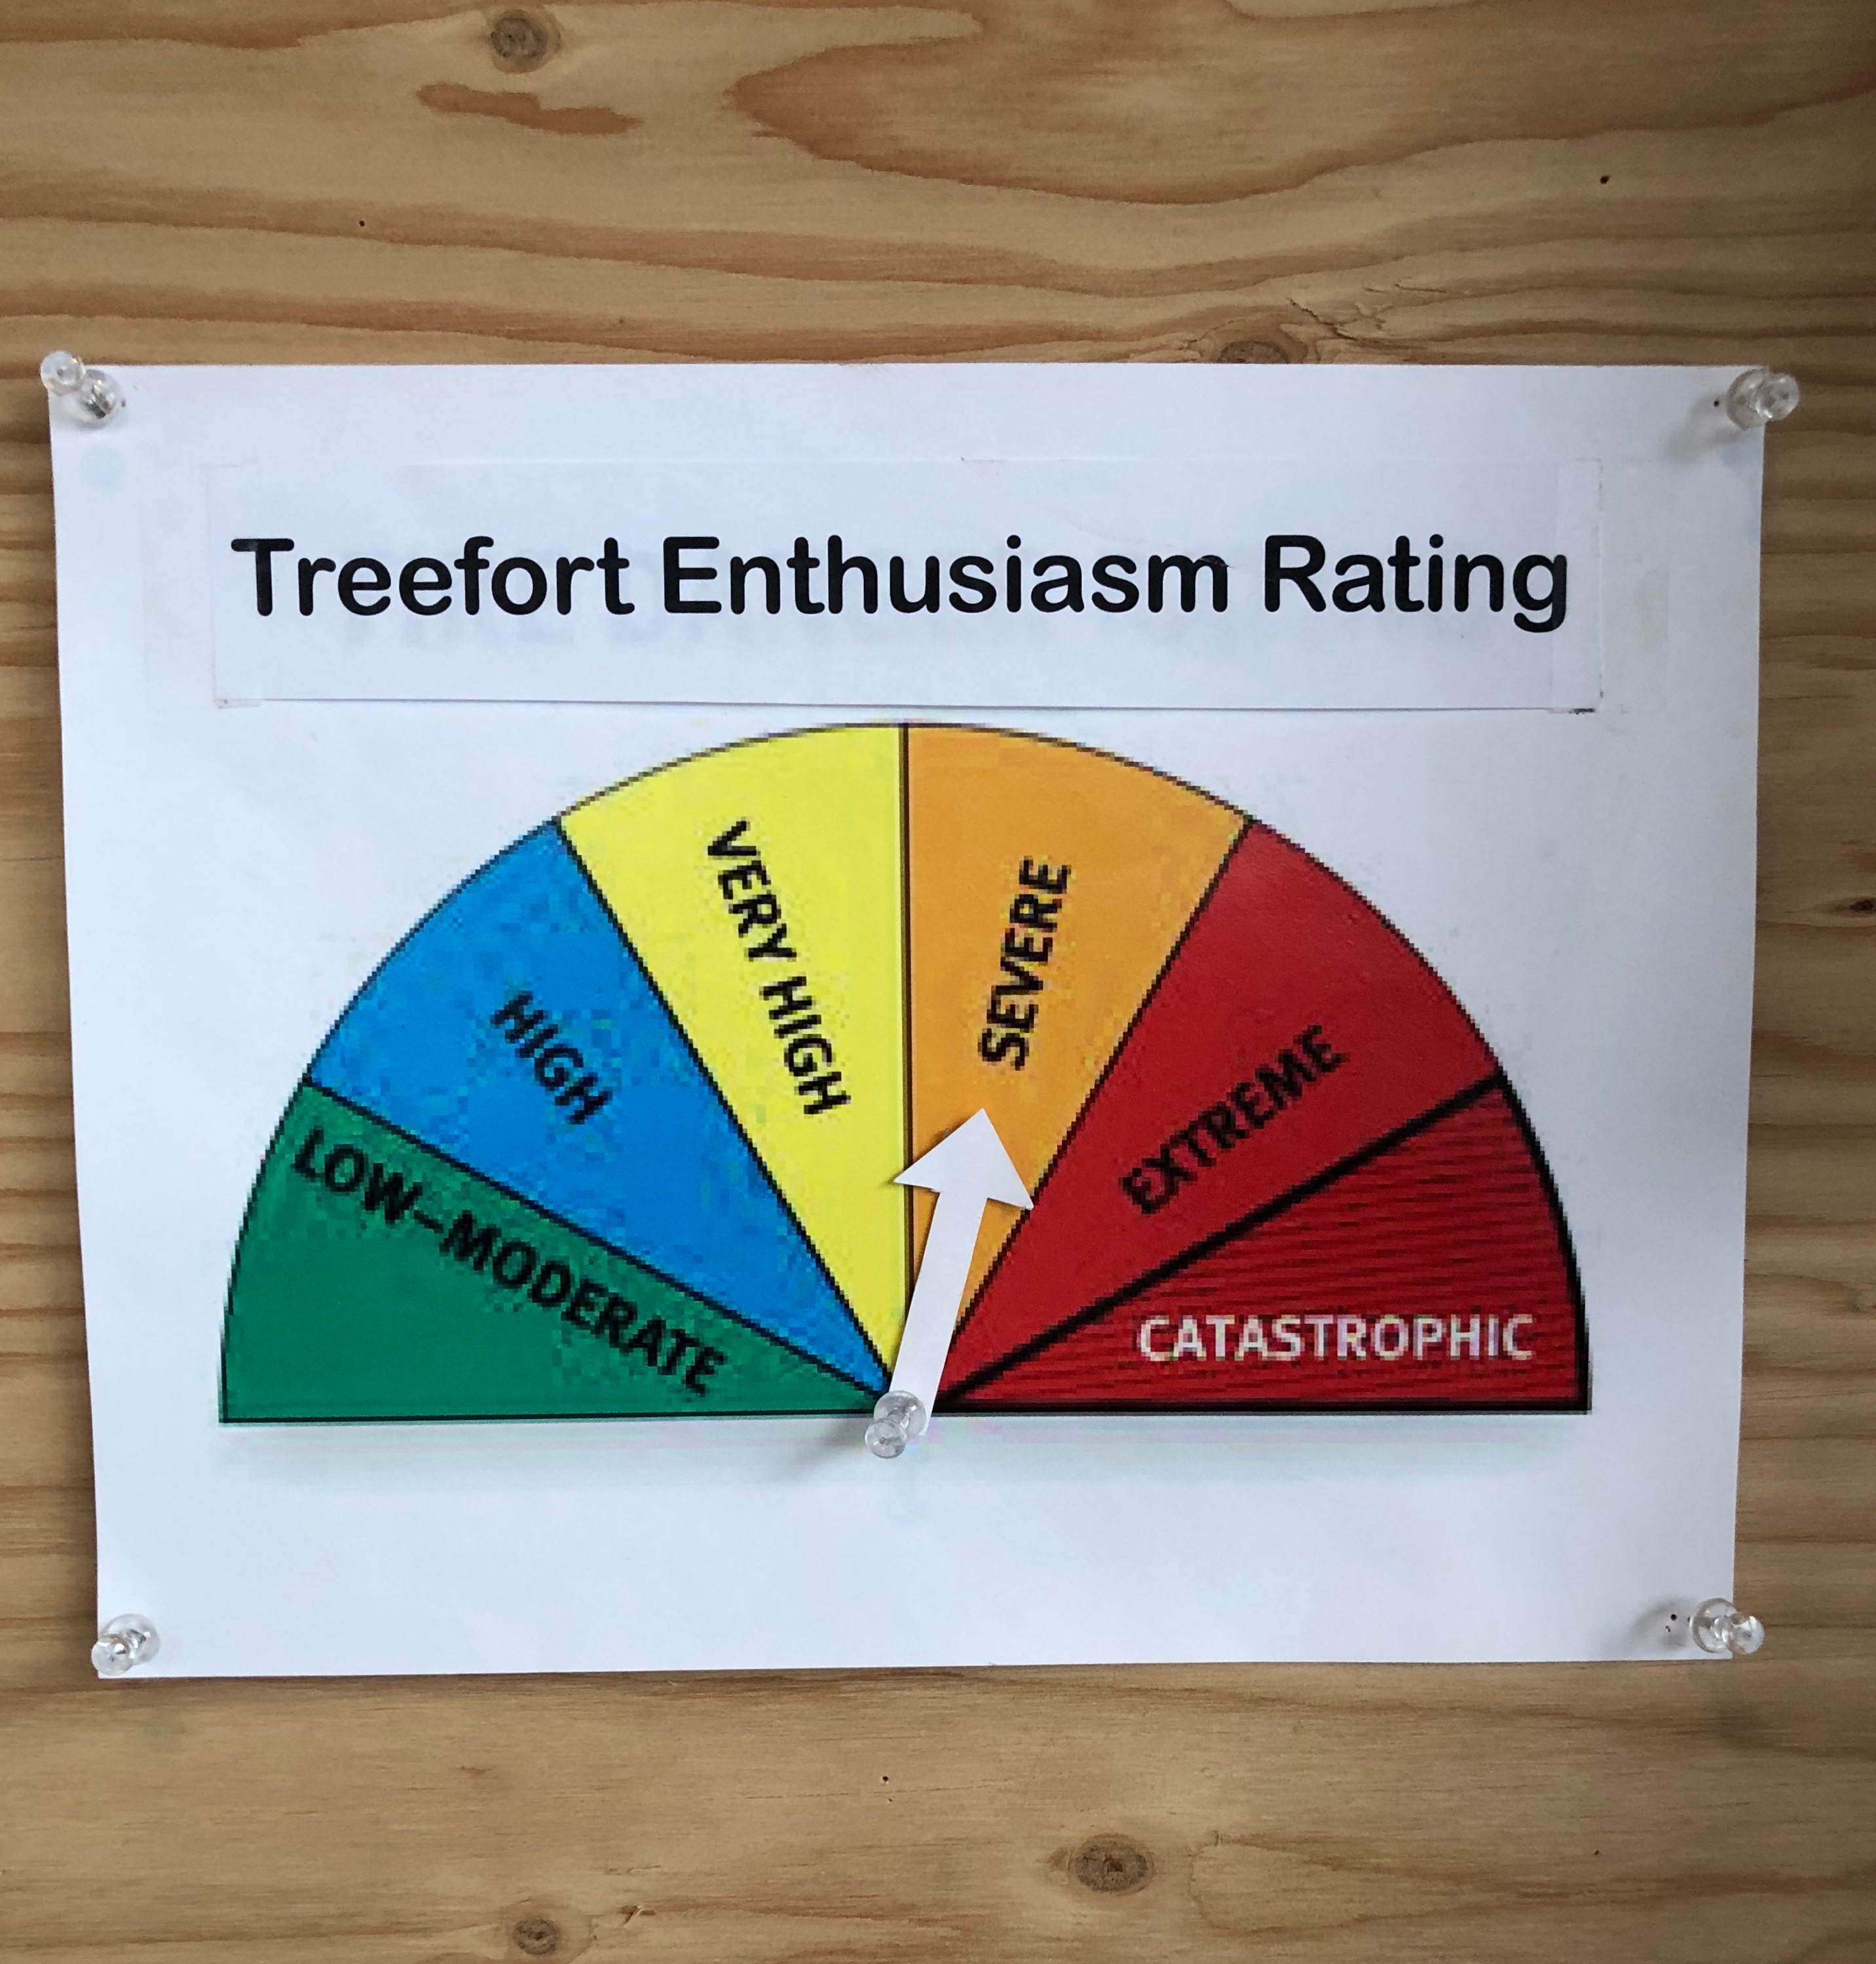 The Treefort Enthusiasm Rating was SEVERE!